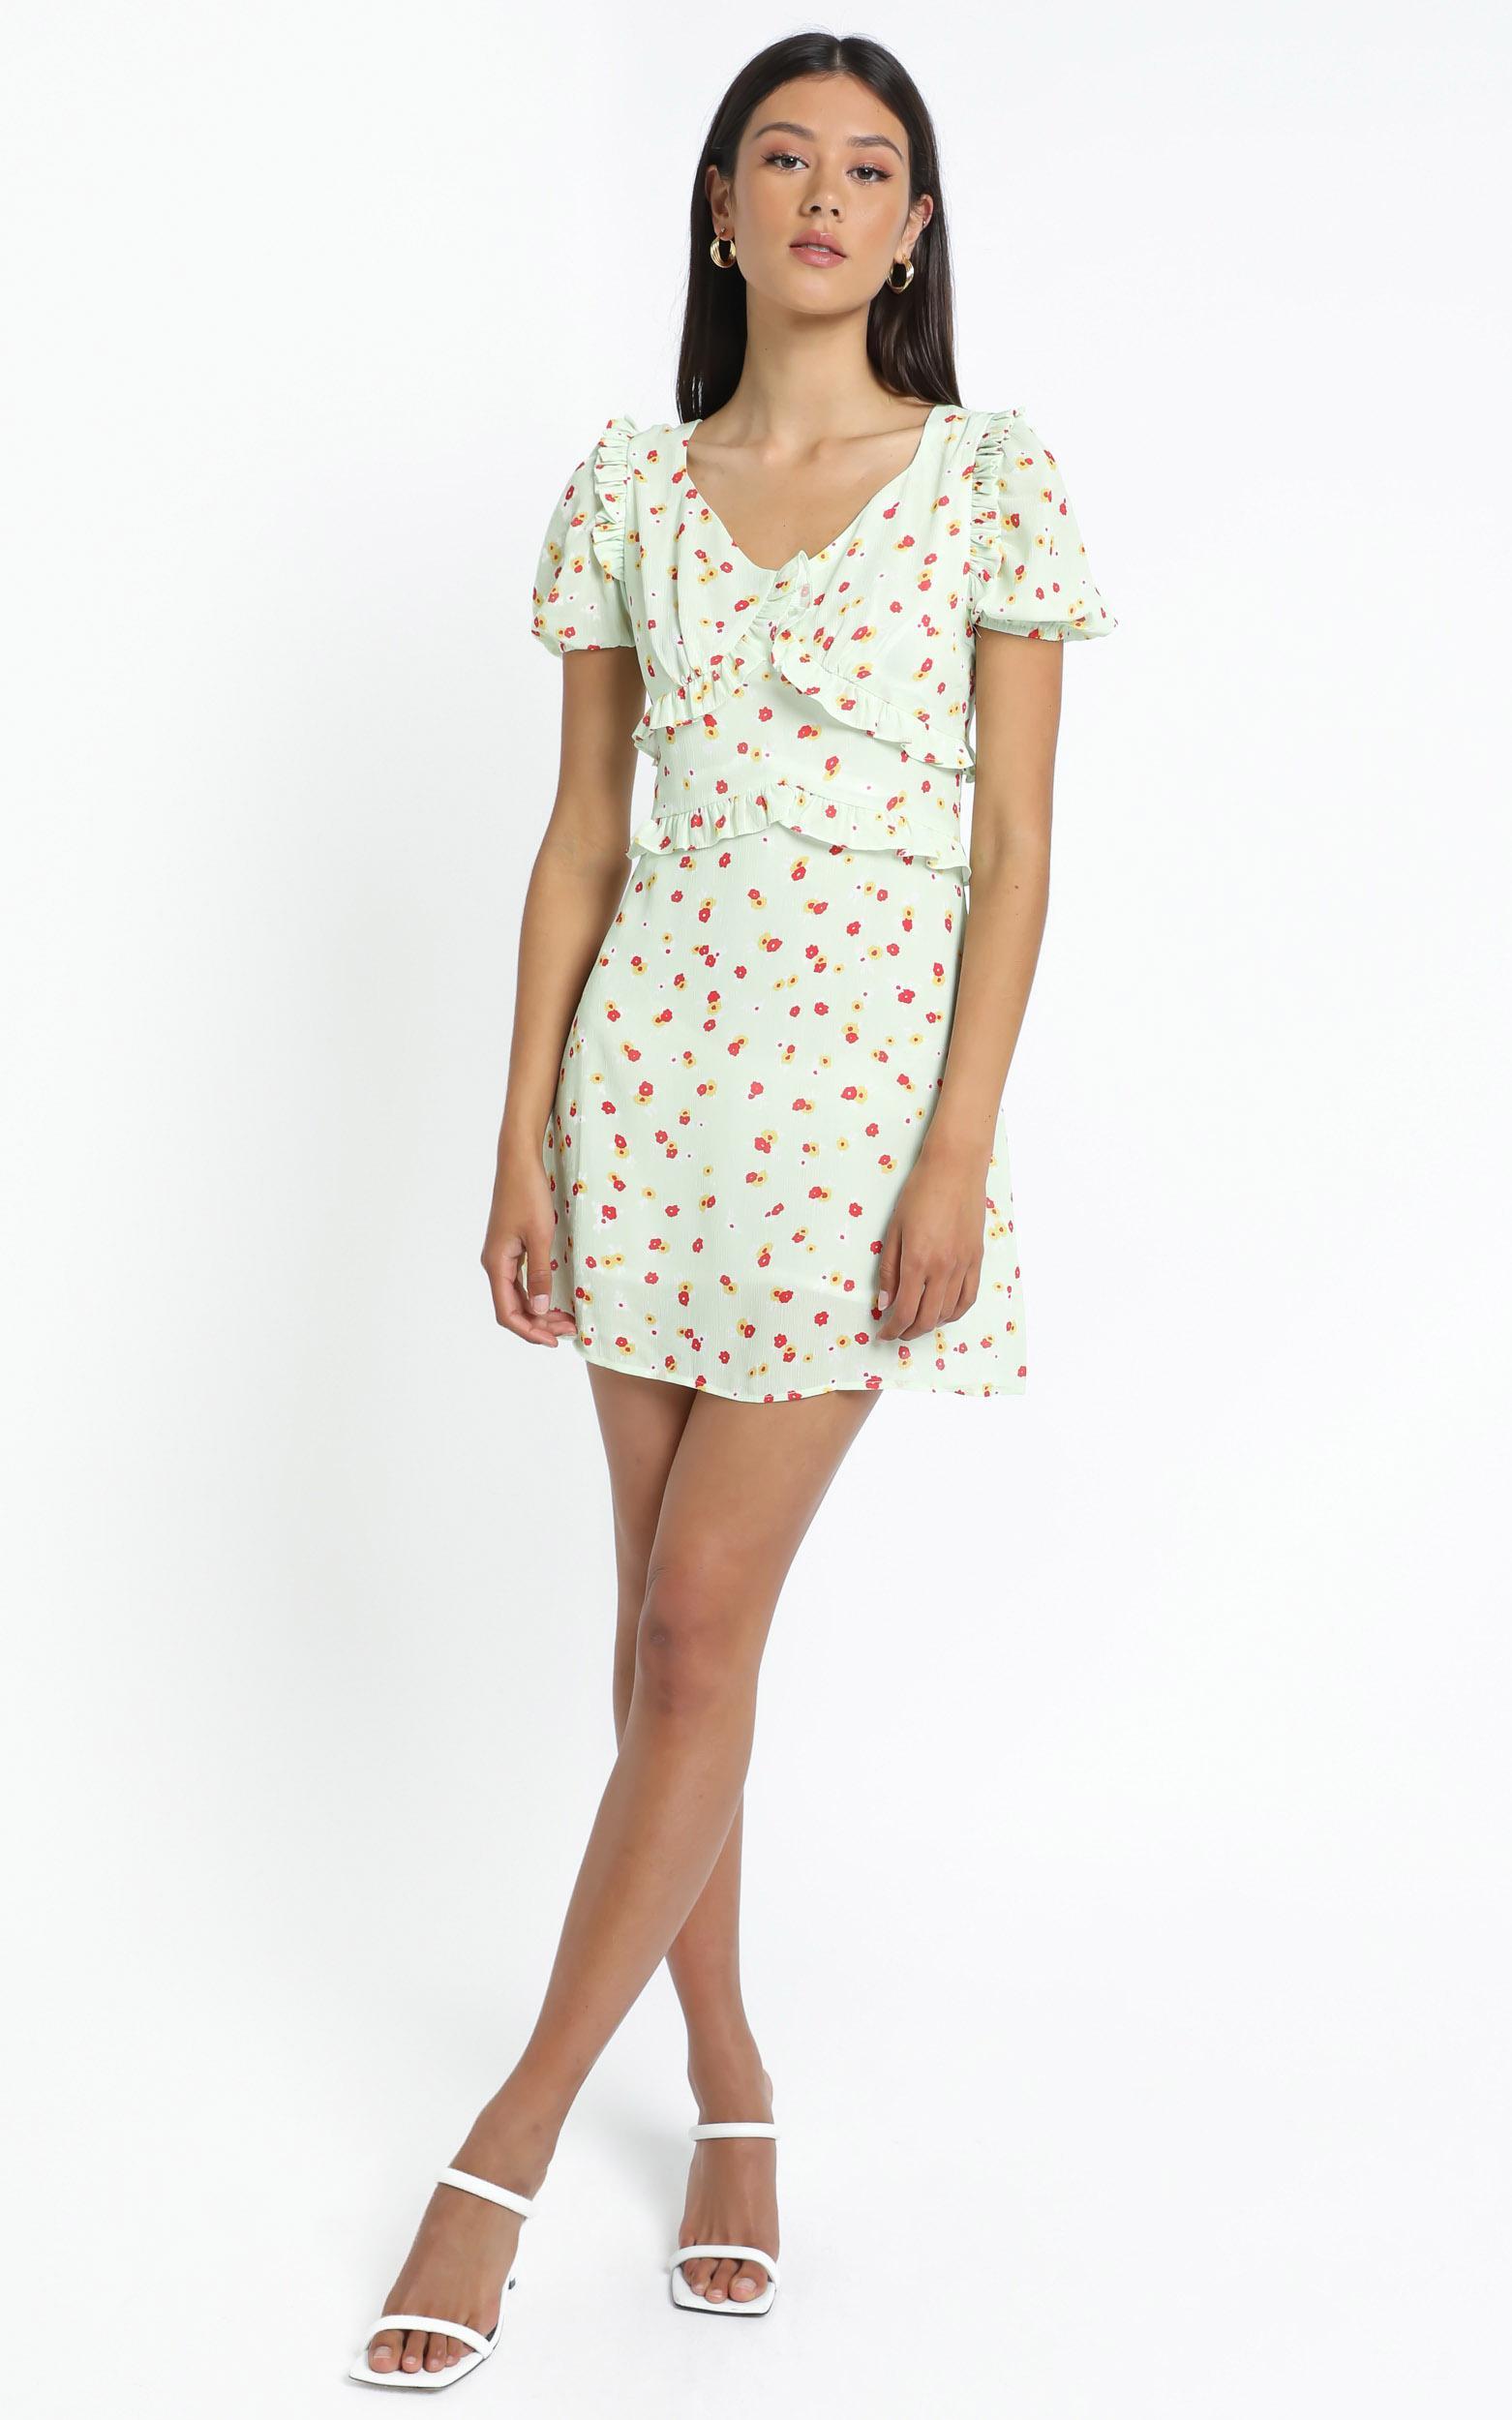 Lacie Dress in Green Floral - 12 (L), Green, hi-res image number null